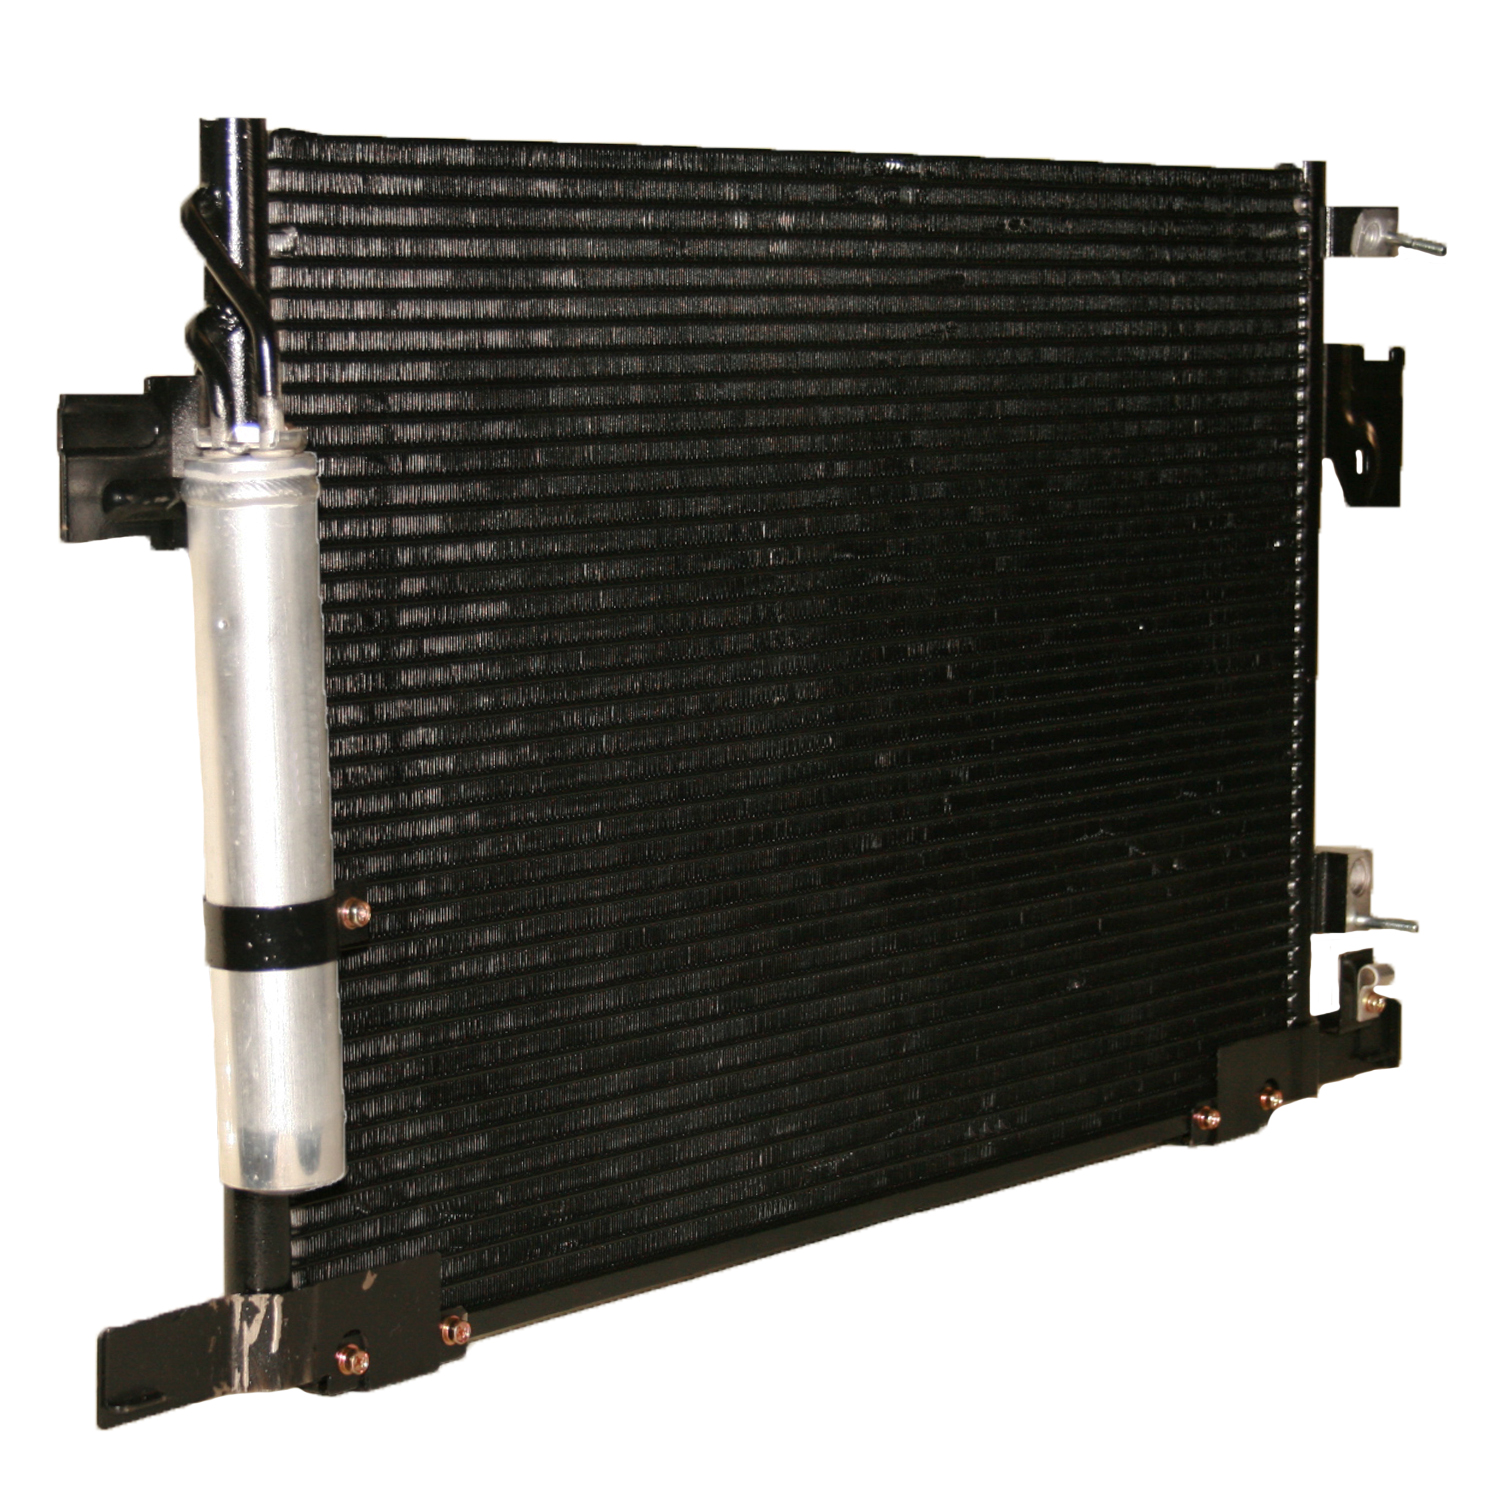 TCW Condenser 44-3747 New Product Image field_60b6a13a6e67c